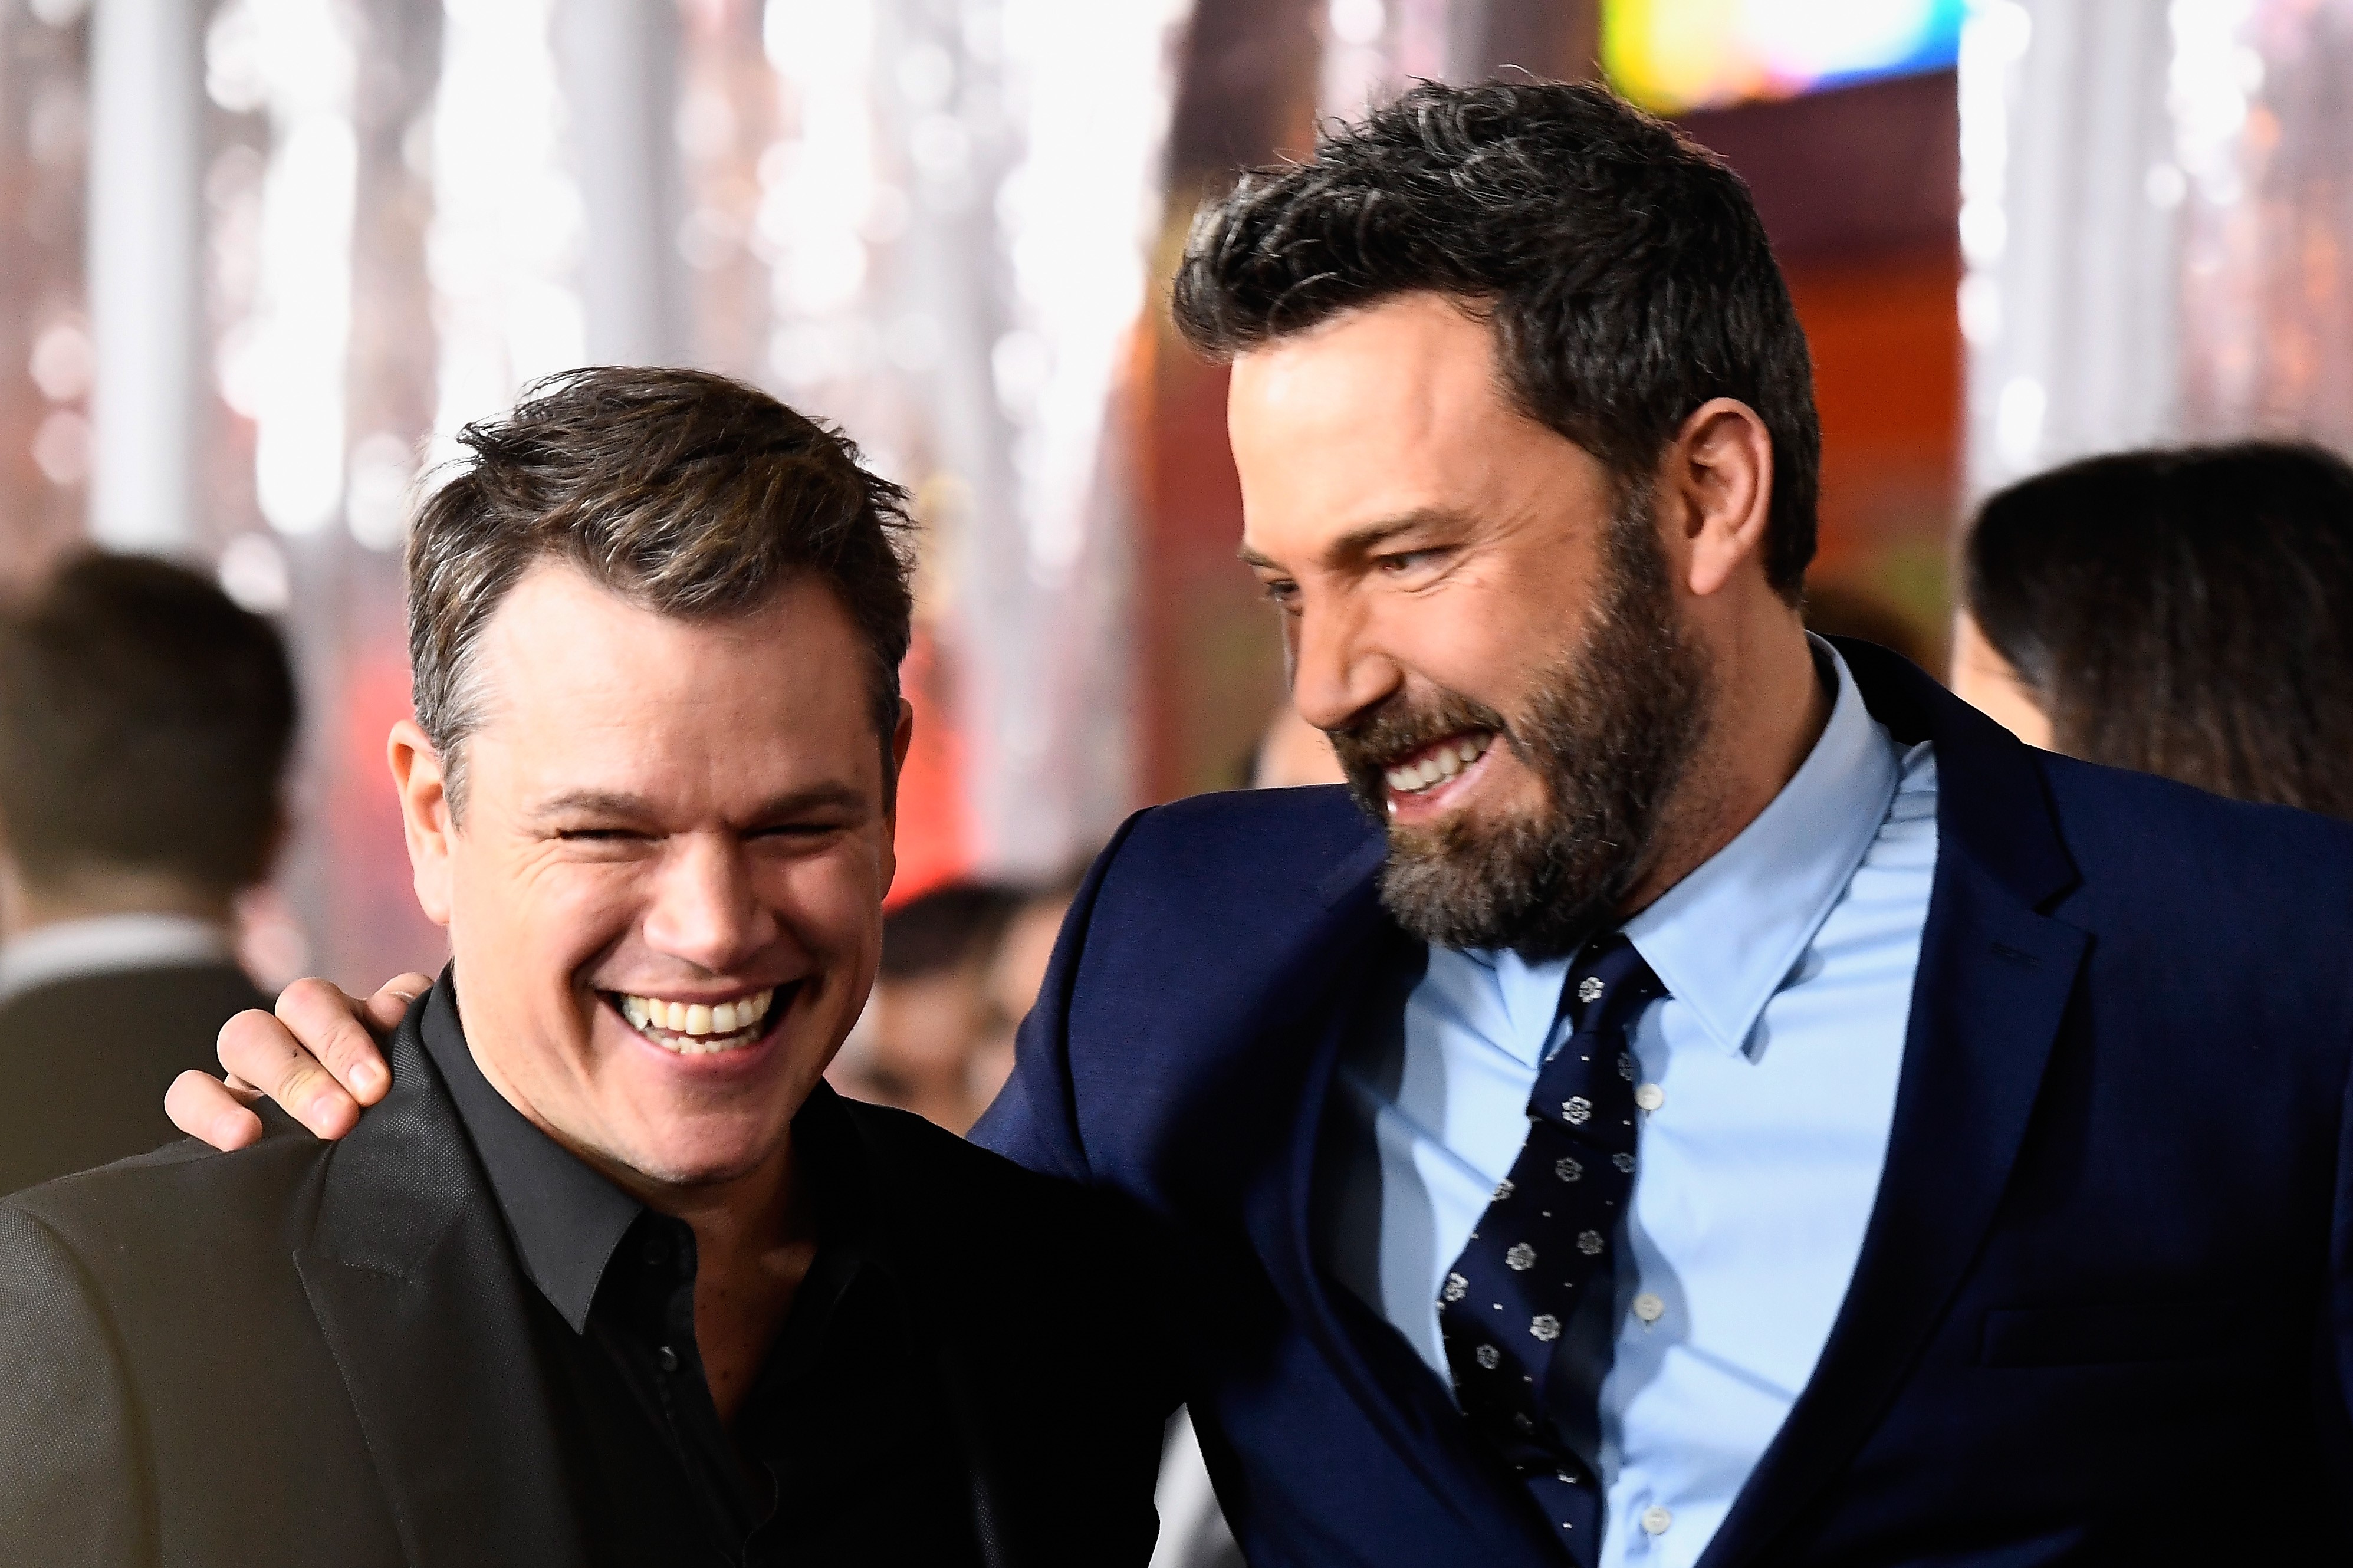 Matt Damon and Ben Affleck, in brown and blue jackets sharing a laugh, at the premiere of Warner Bros.' 'Live By Night' in 2017.